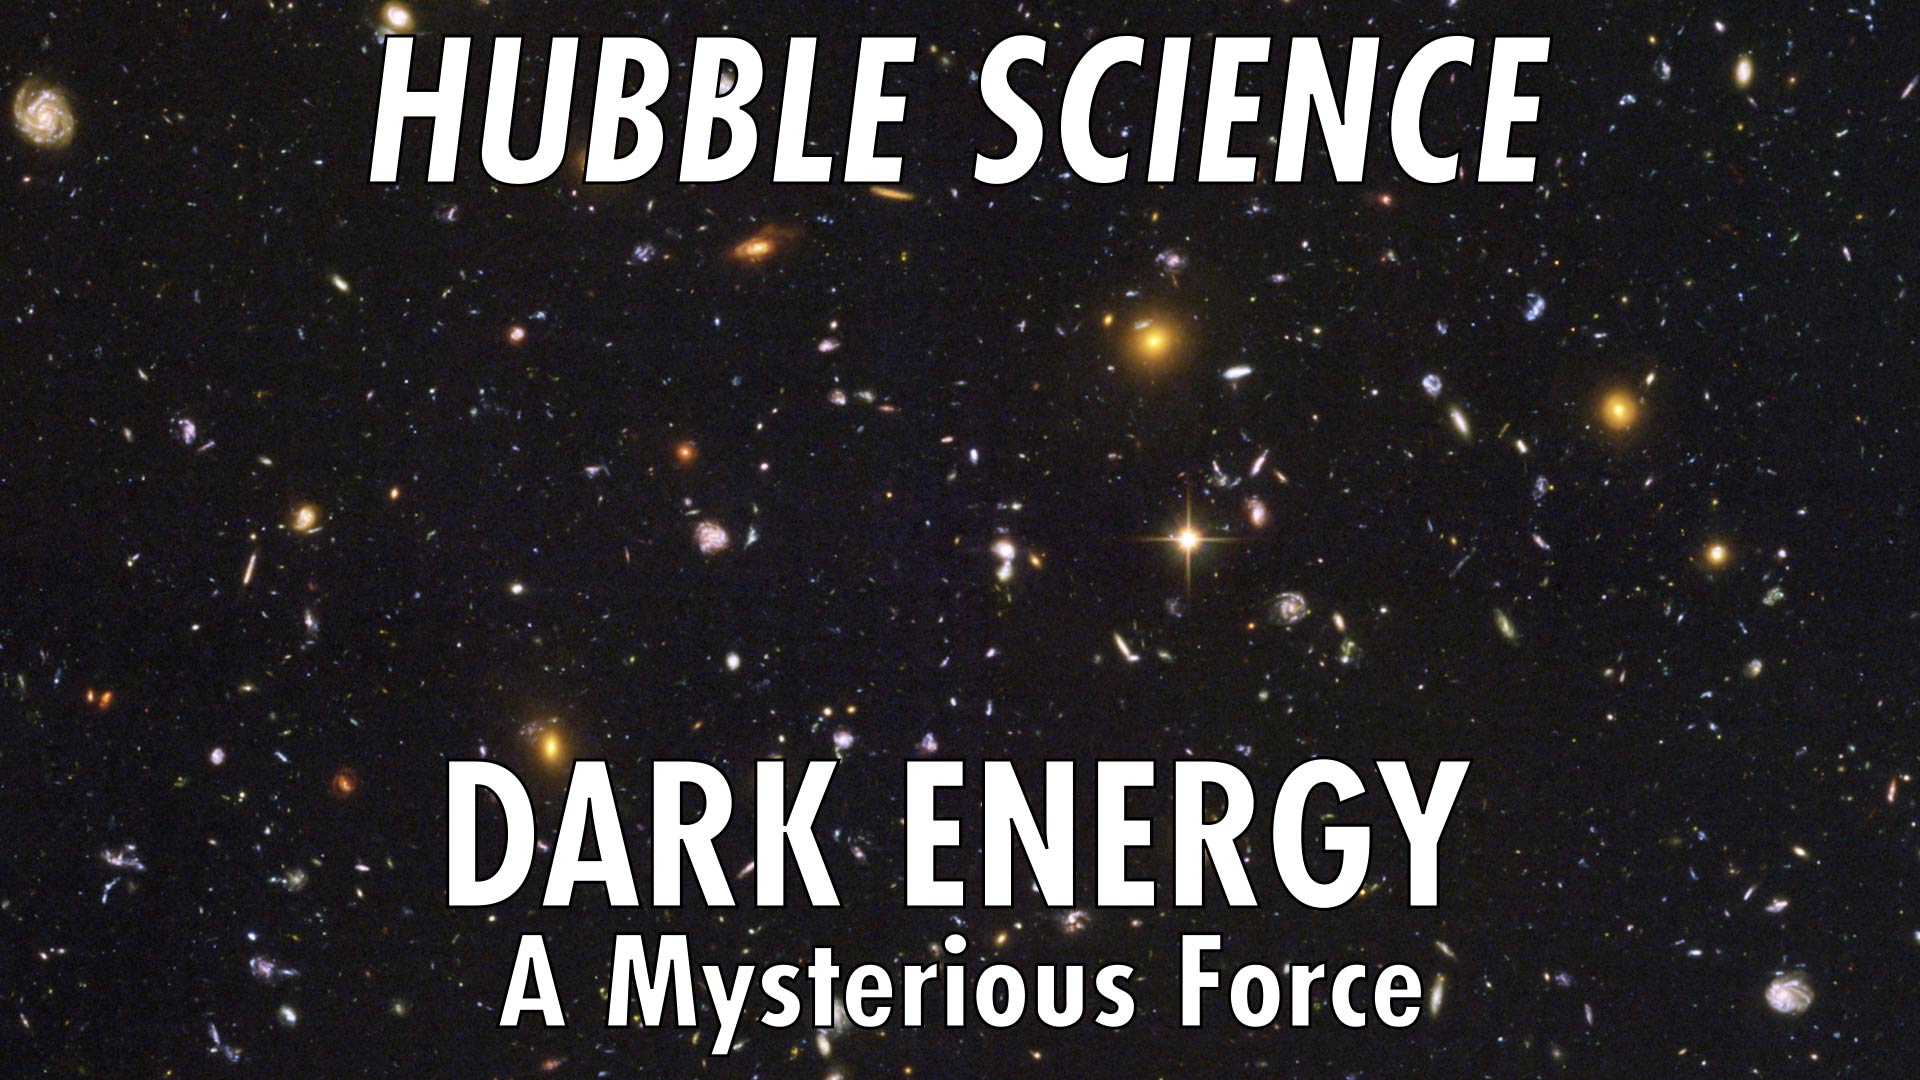 Preview Image for Hubble Science: Dark Energy, A Mysterious Force